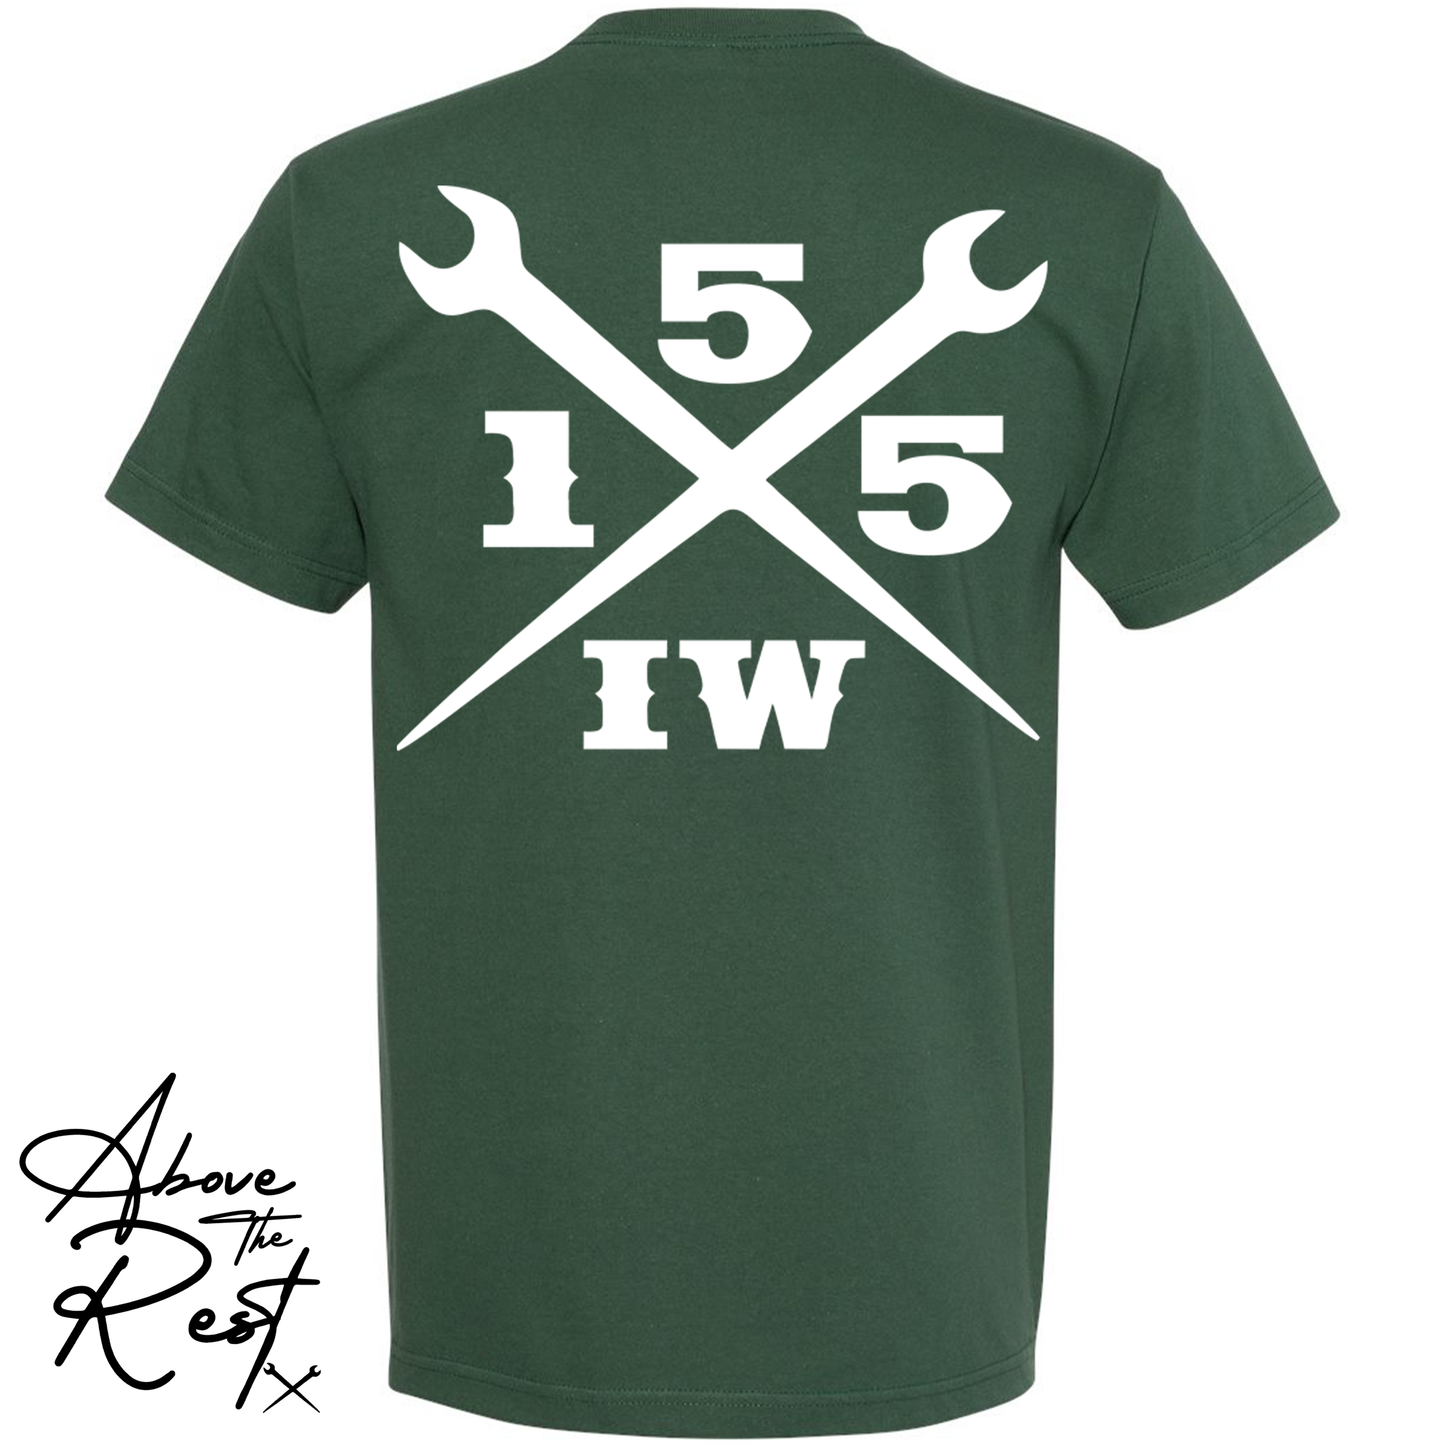 IW SPUDS LOCAL 155 T-SHIRT